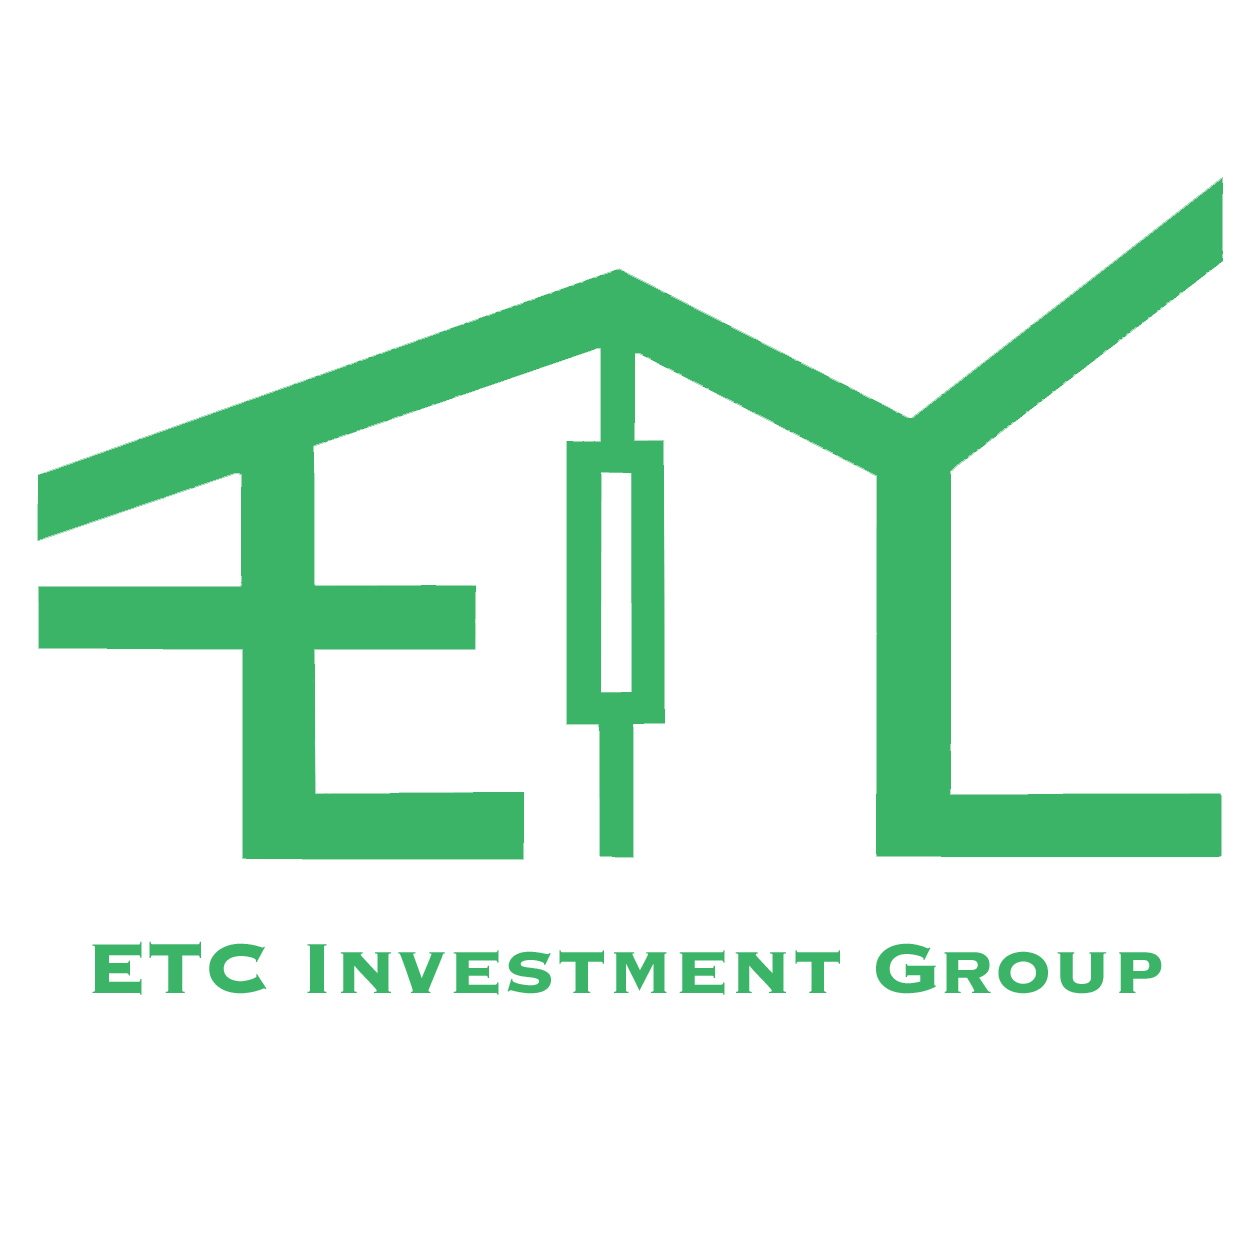 ETC Investment Group